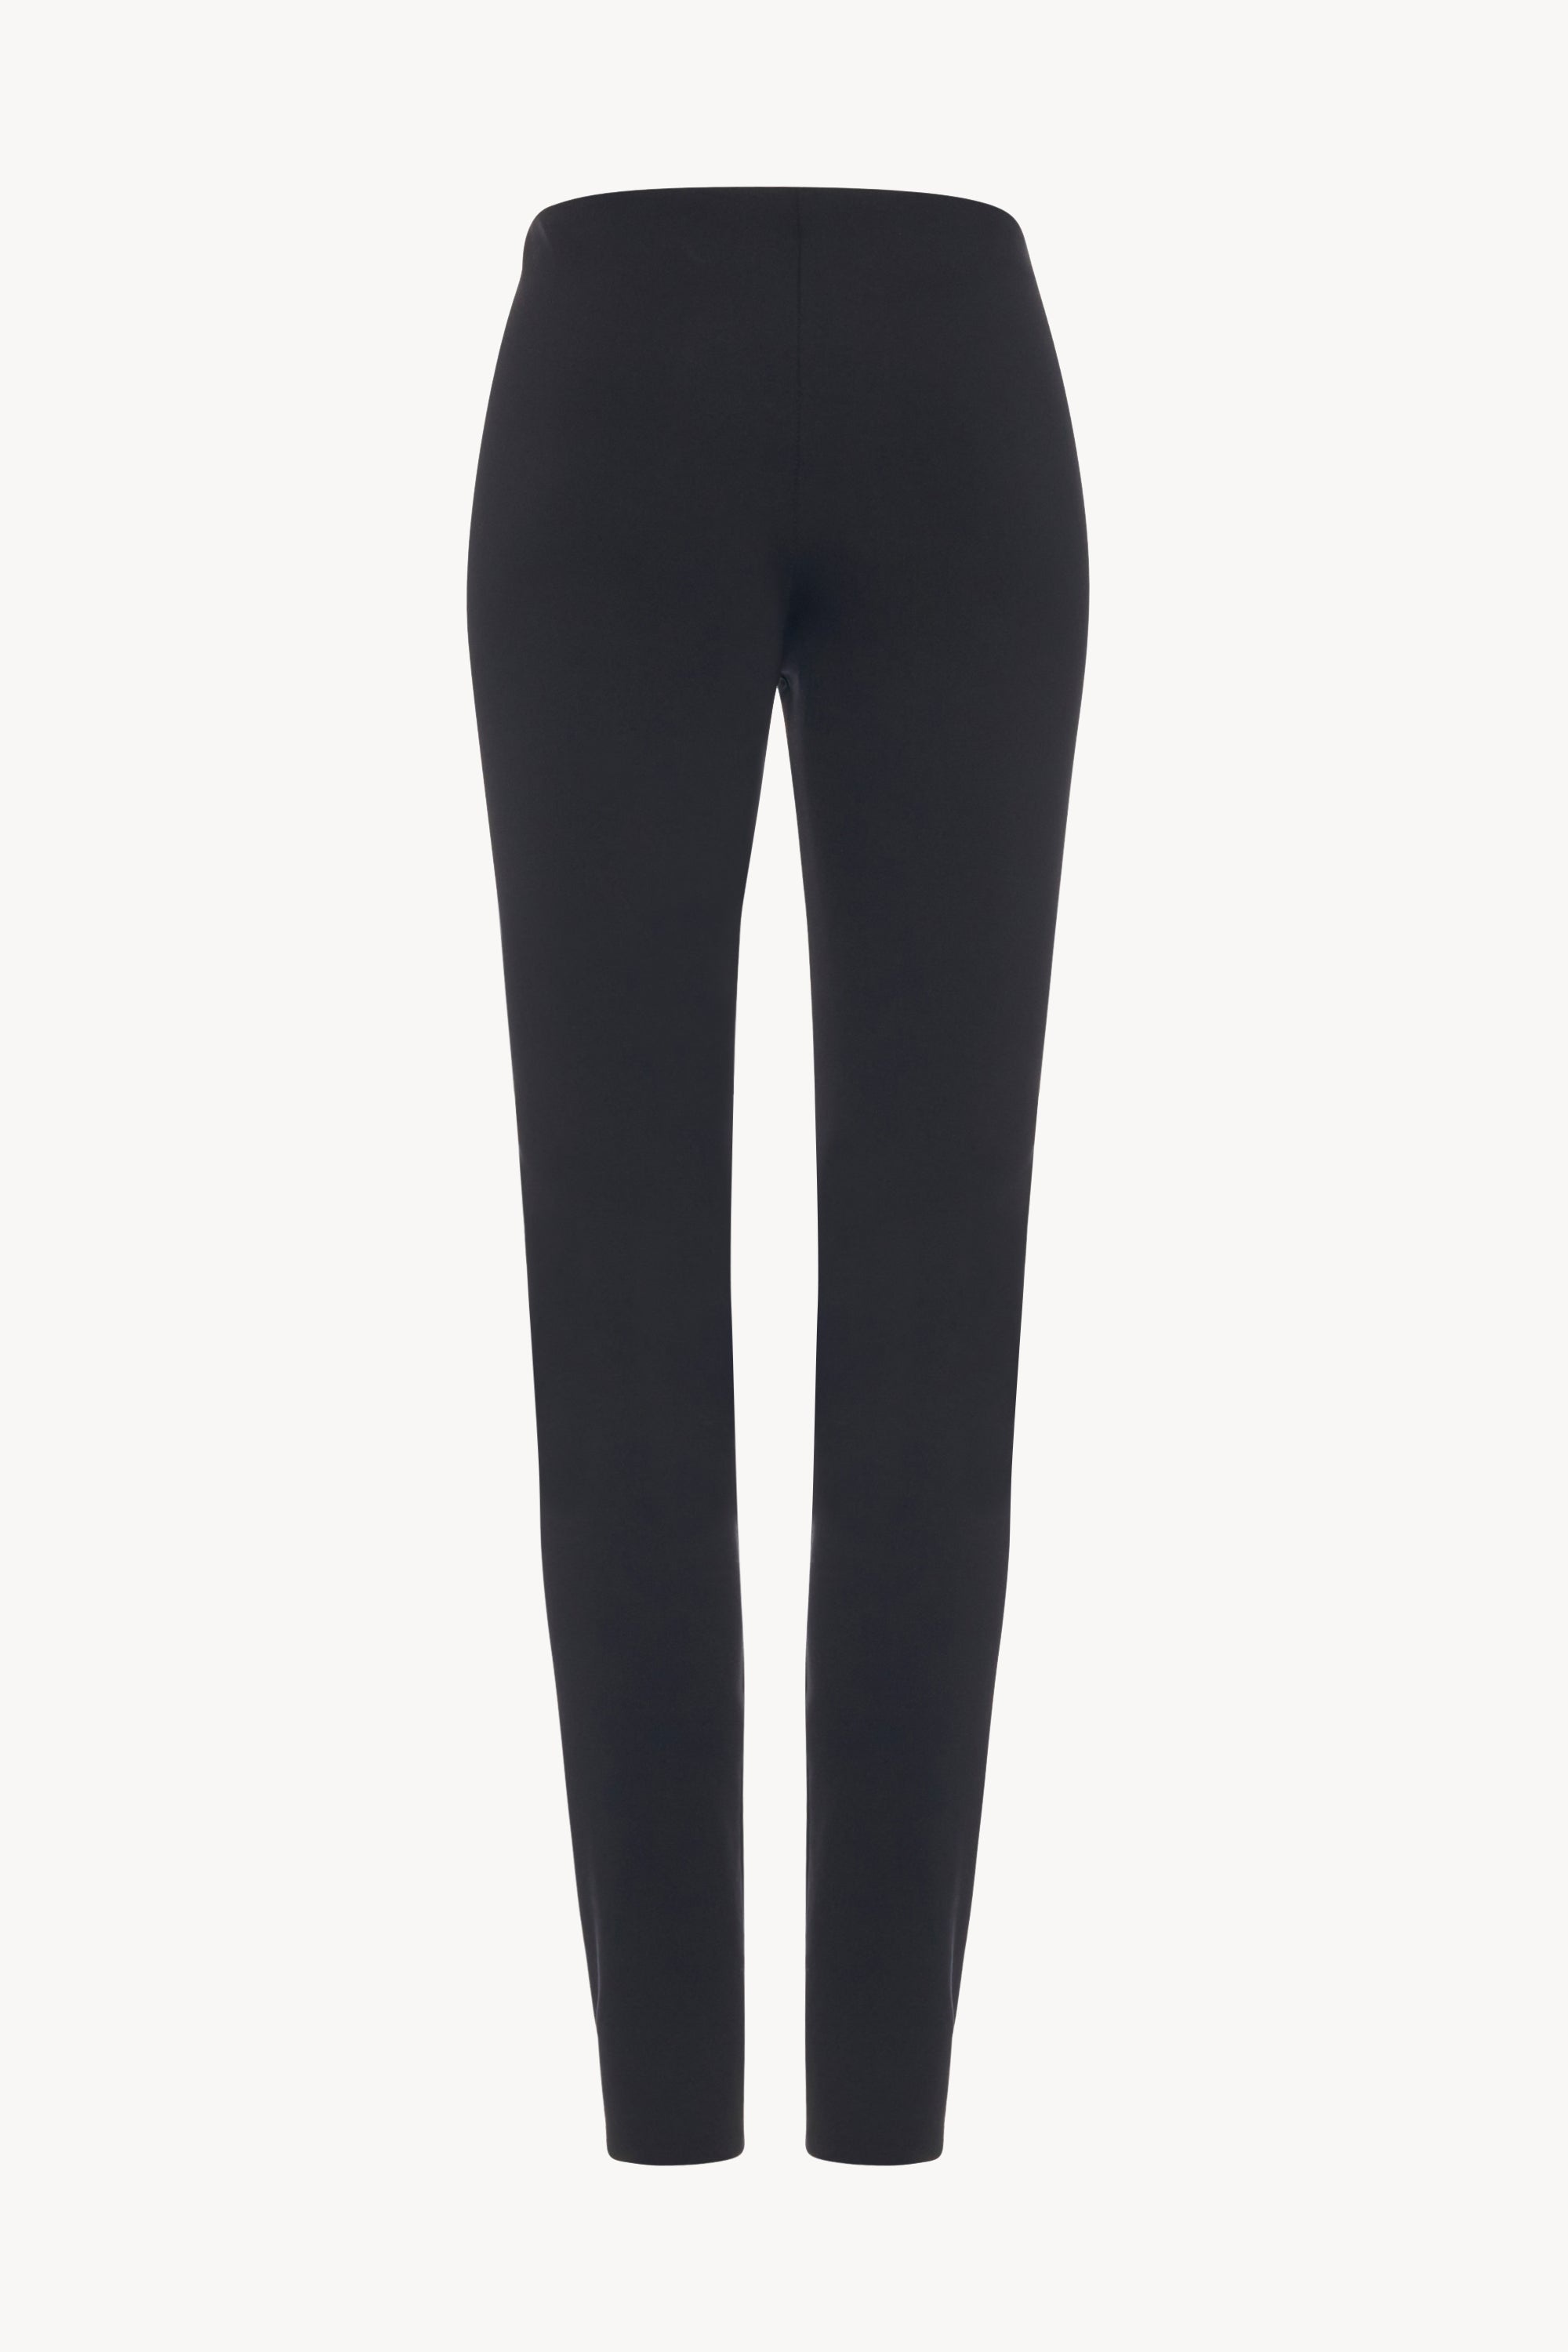 Woolworth Pant in Scuba - 2